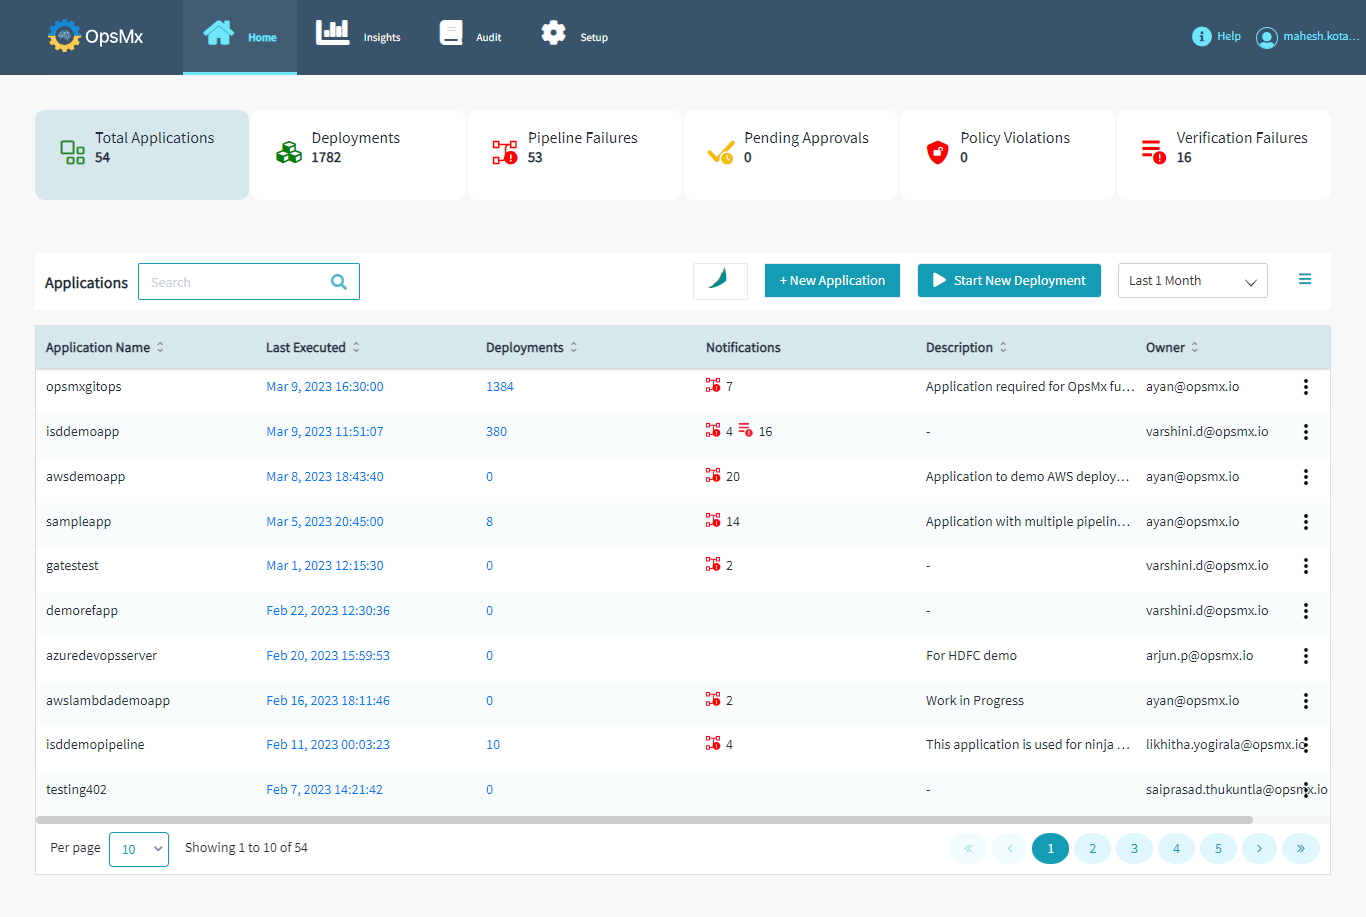 Unified Dashboard for Visibility and Audit